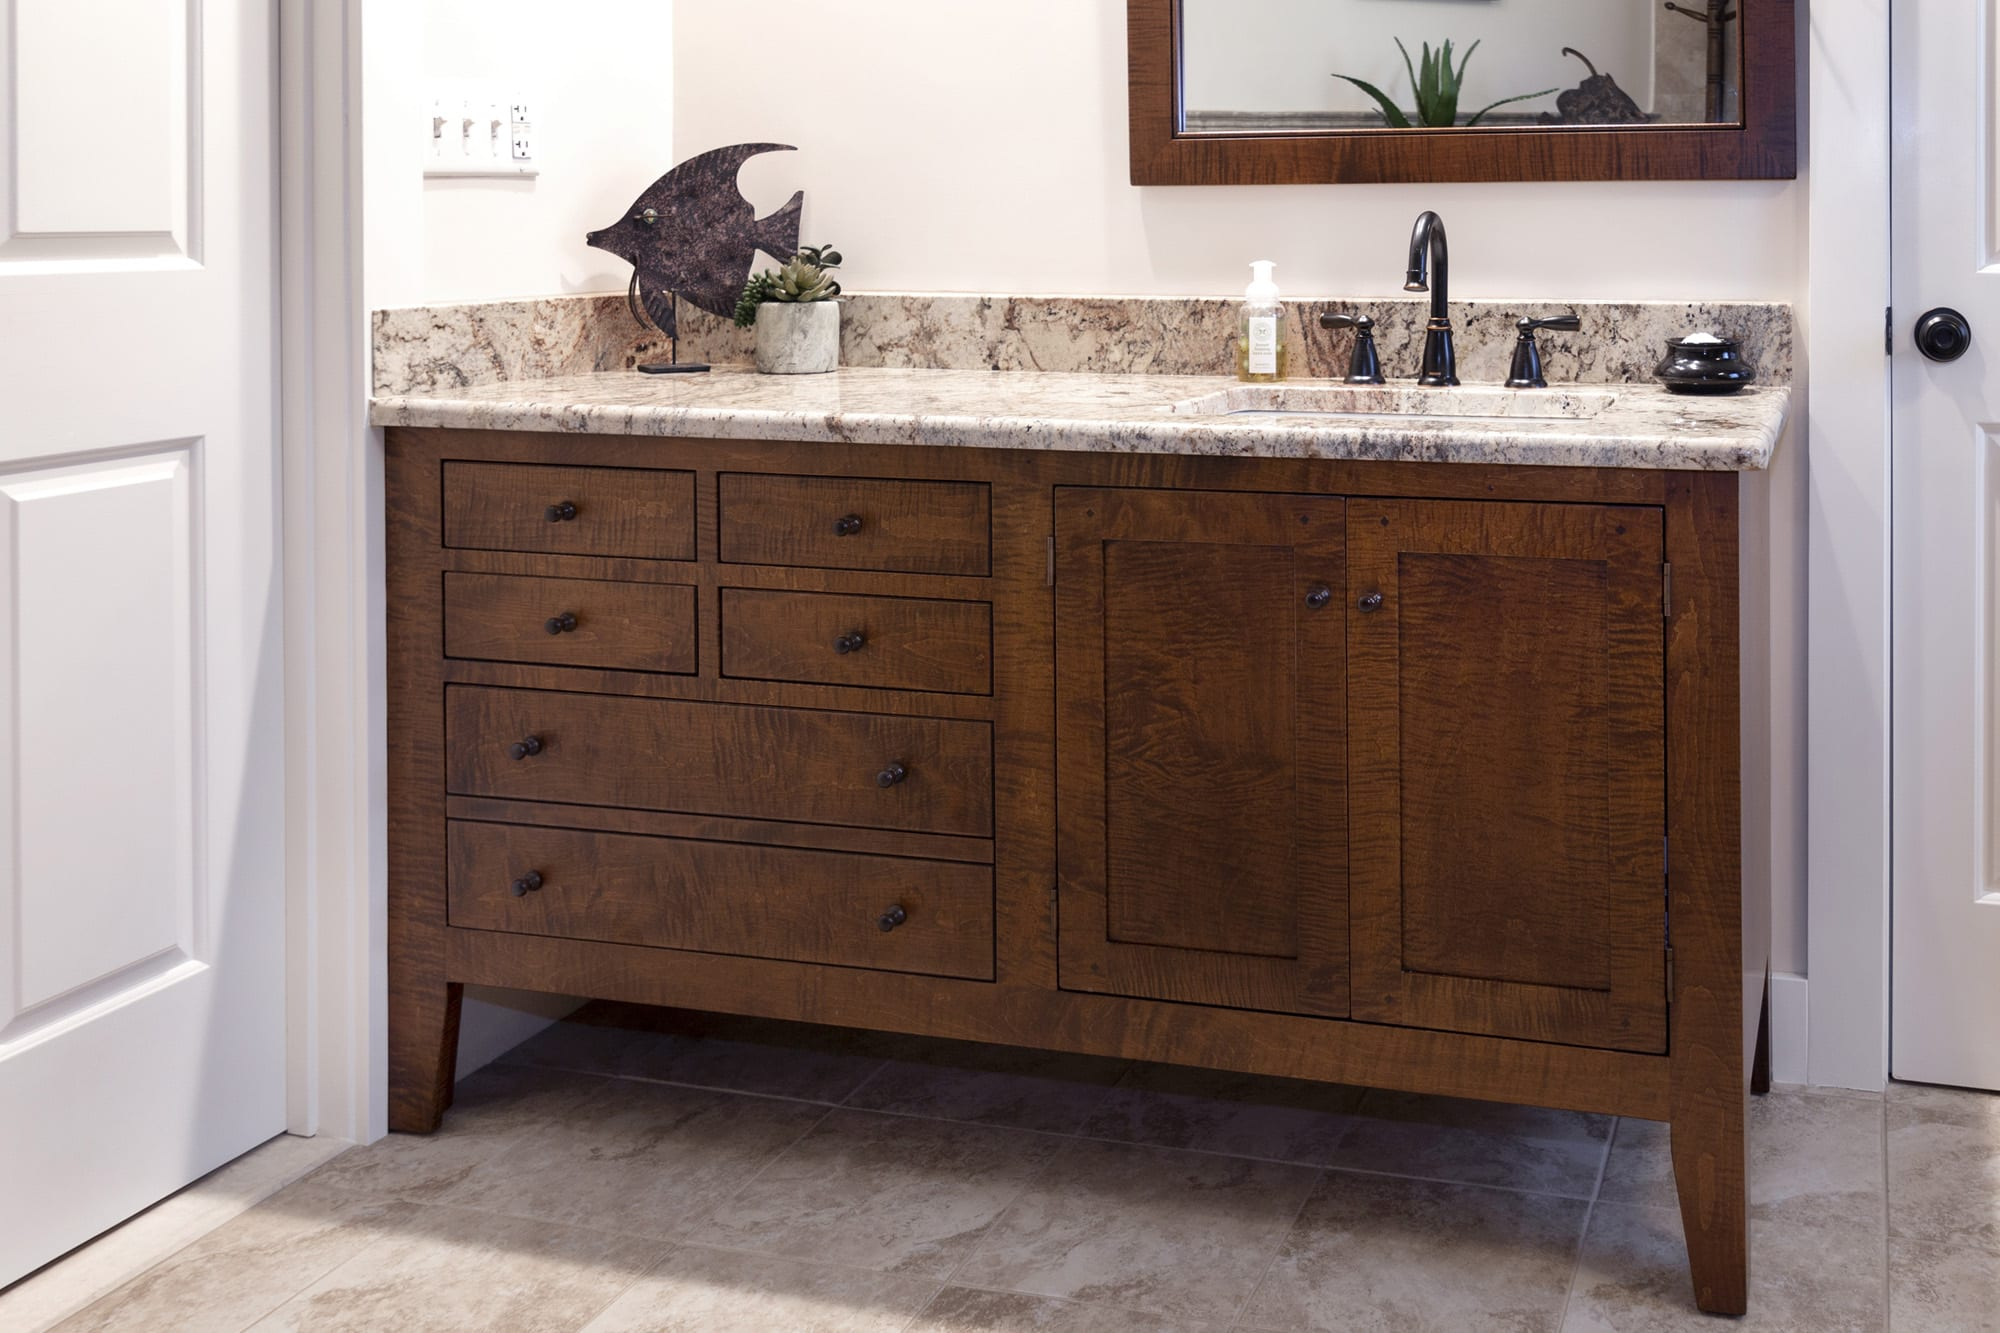 Shaker Style Bathroom Vanities Of High Quality In Tiger Maple Cherry in measurements 2000 X 1333